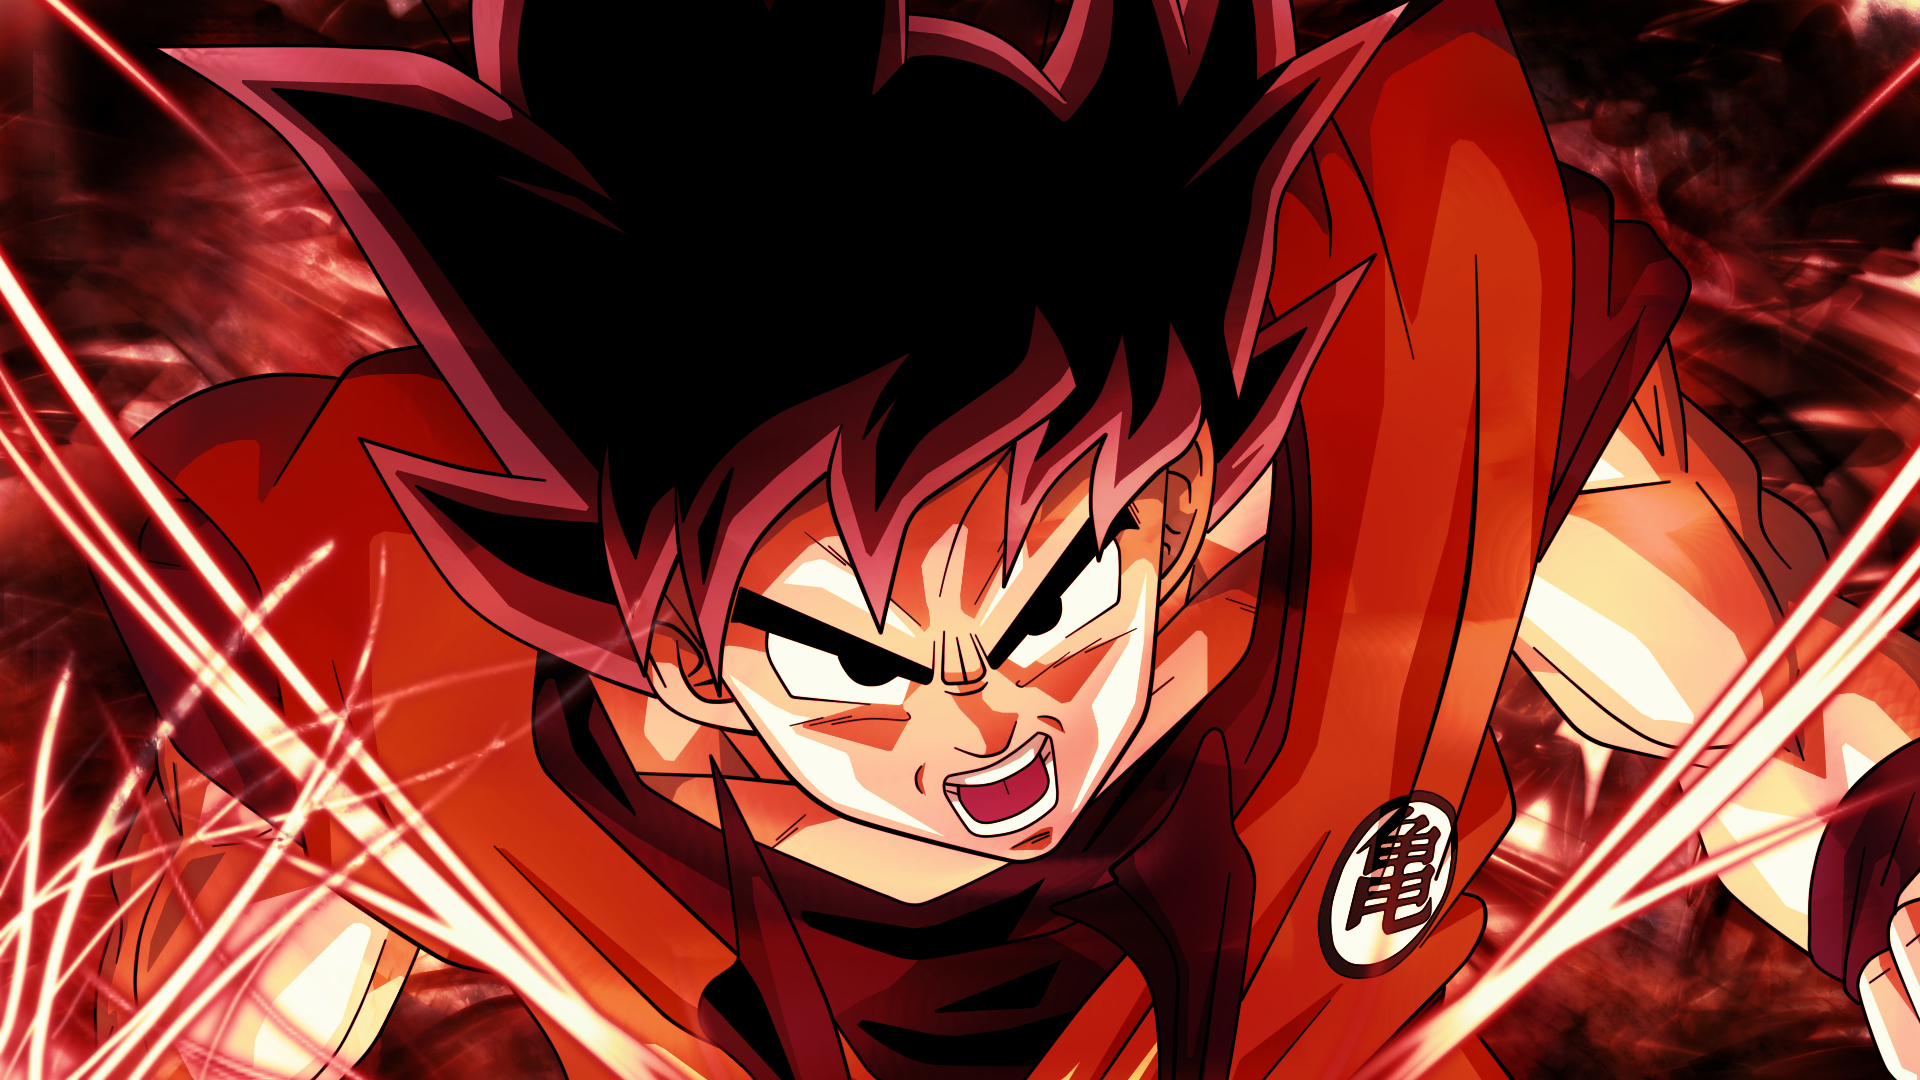 Dragon Ball Goku HD Wallpaper Pictures To